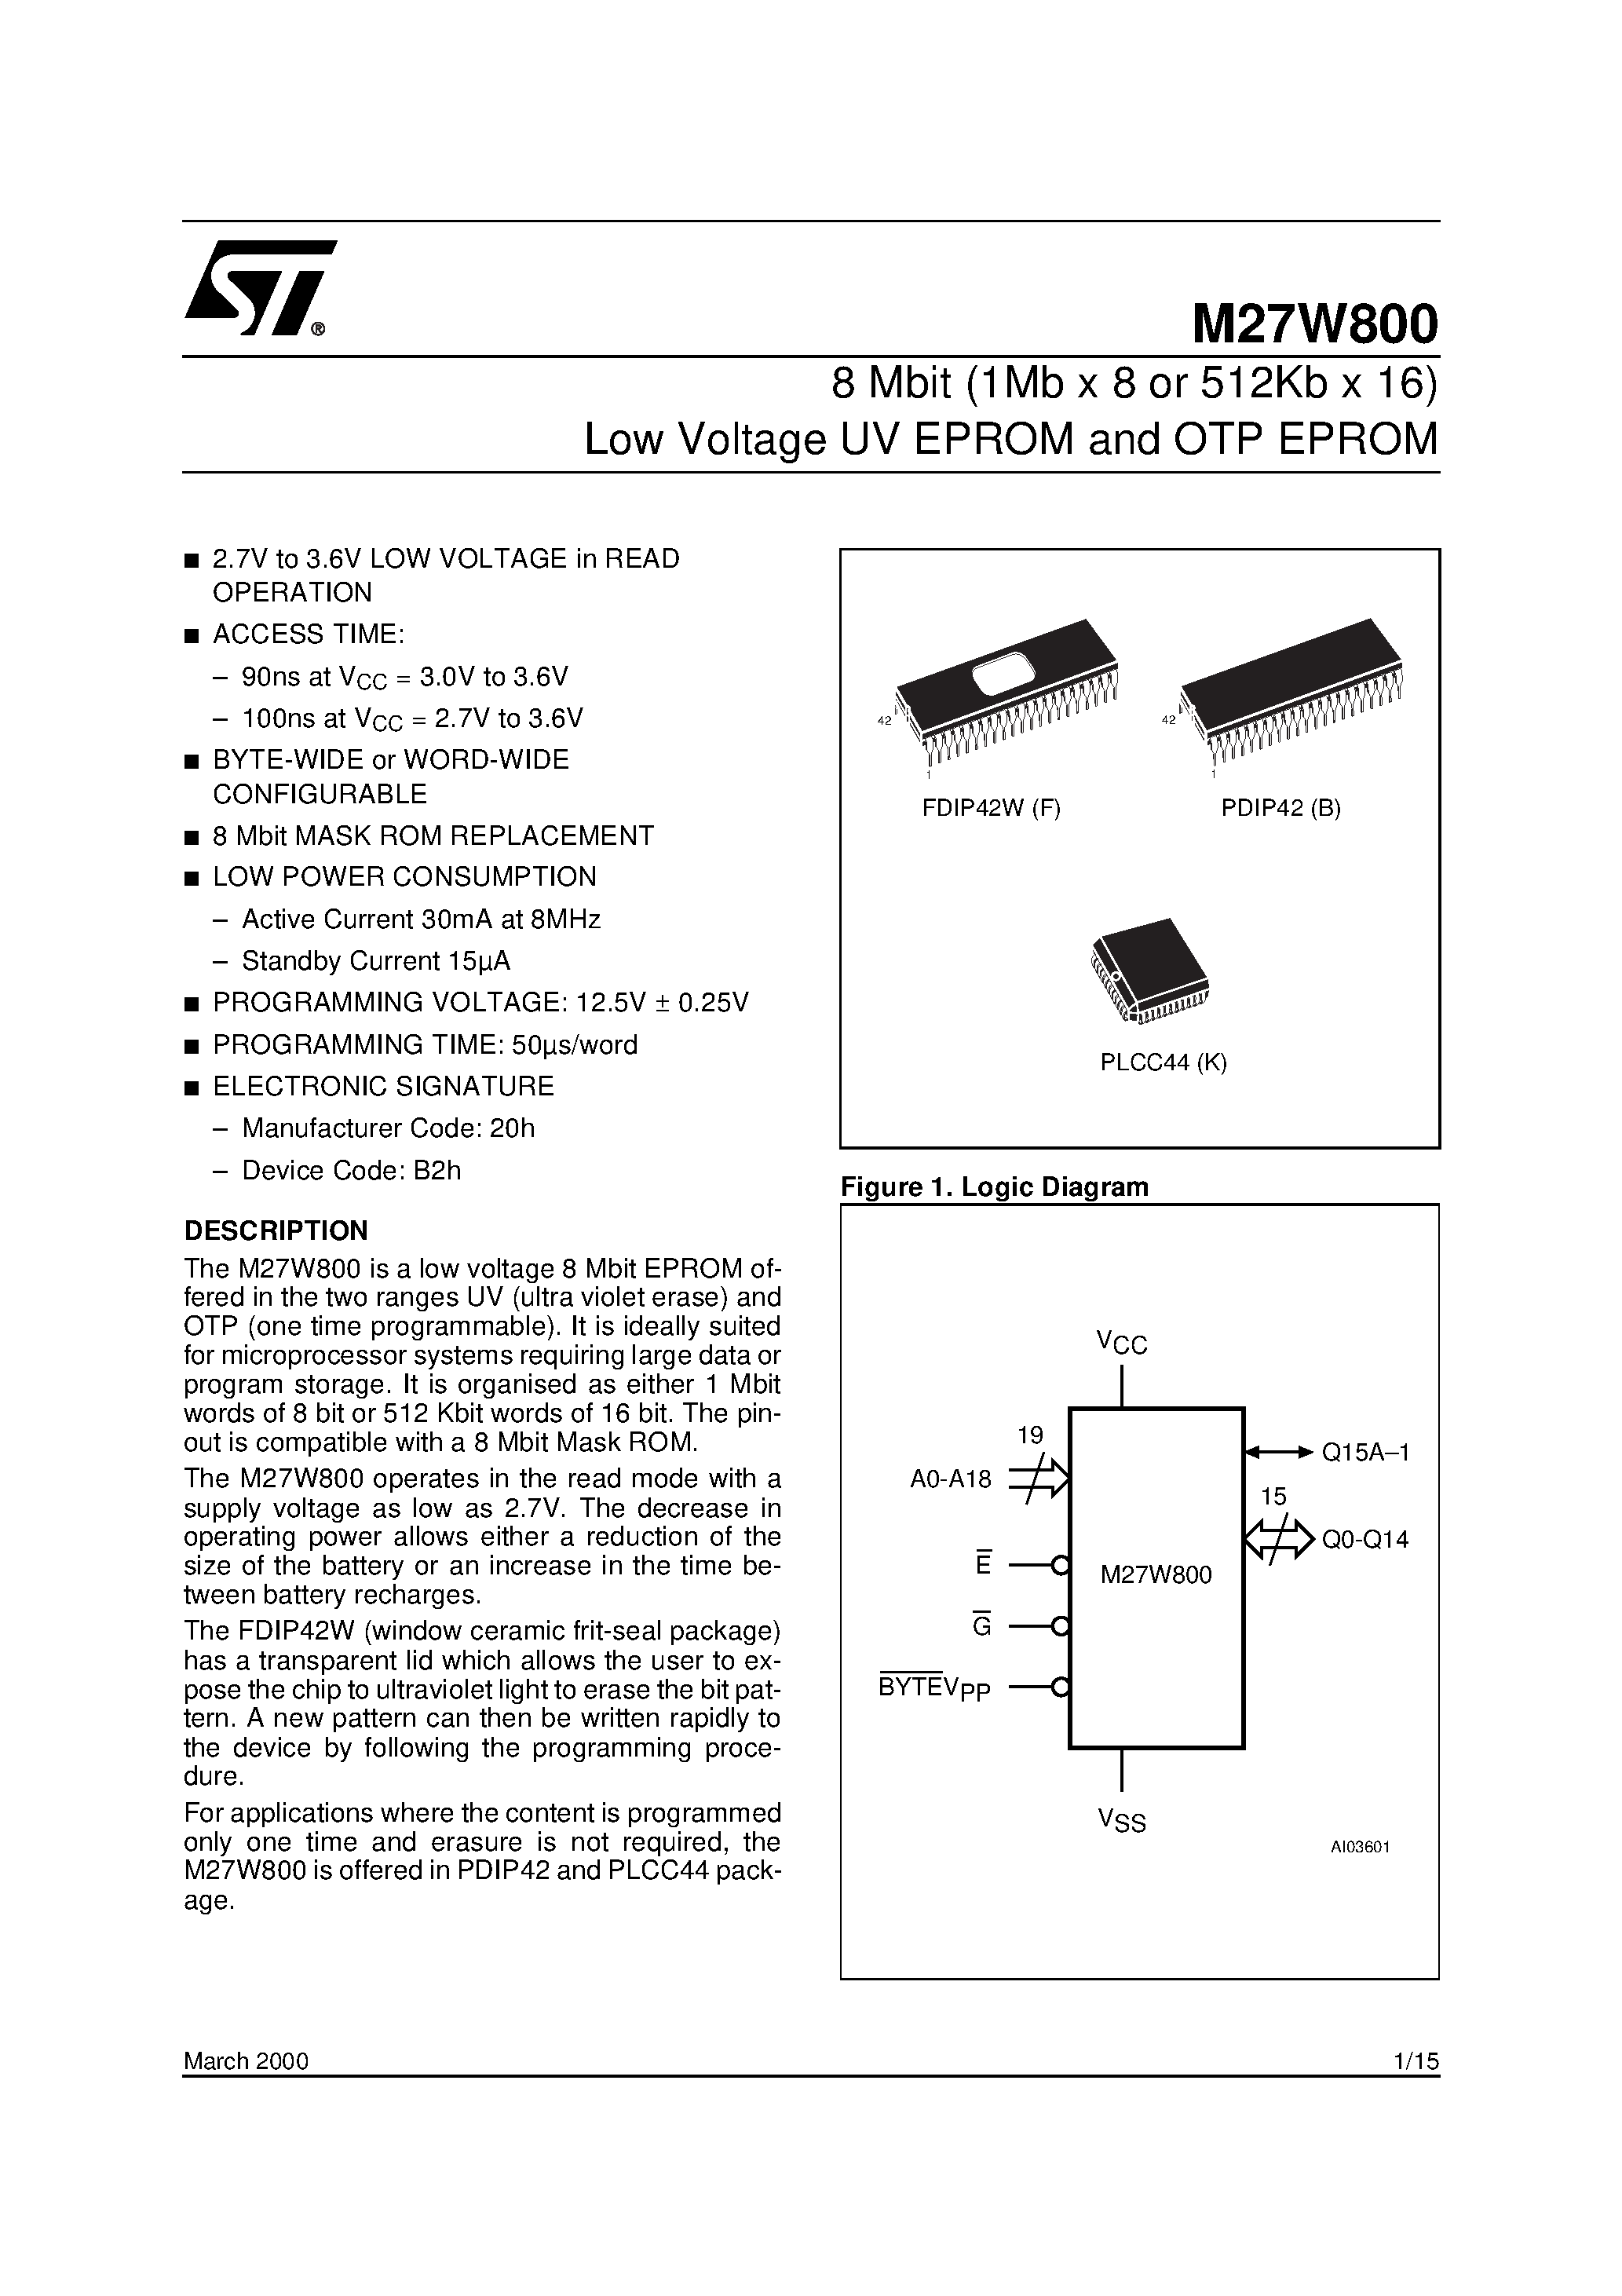 Datasheet M27W800 - 8 Mbit 1Mb x 8 or 512Kb x 16 Low Voltage UV EPROM and OTP EPROM page 1